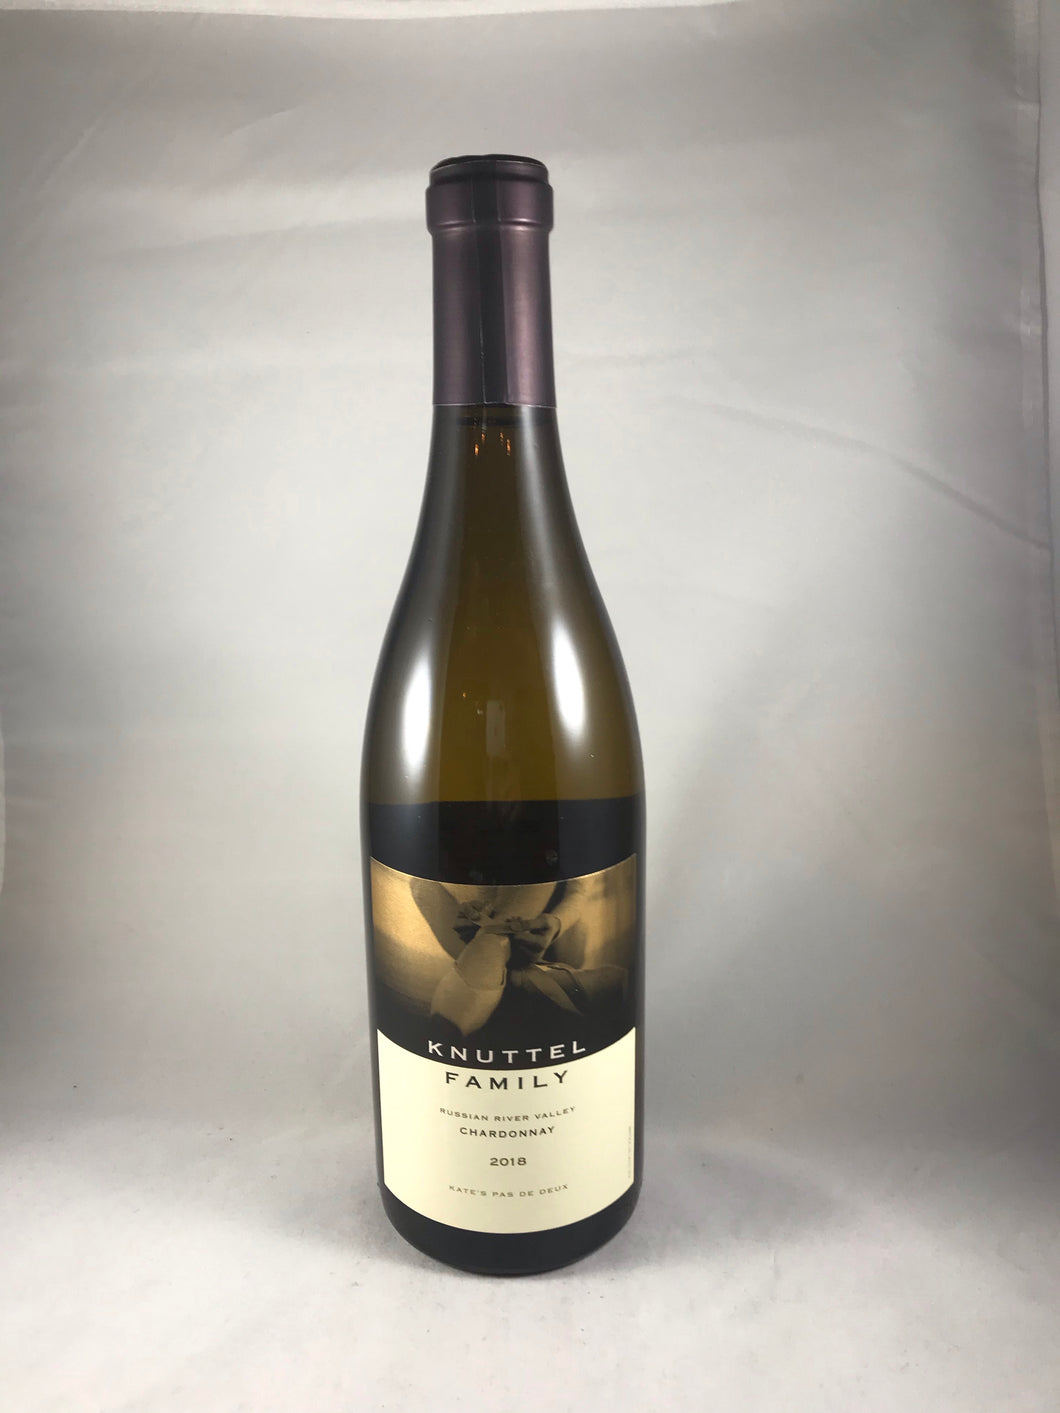 Knuttel Family Chardonnay 2020, Russian River Valley